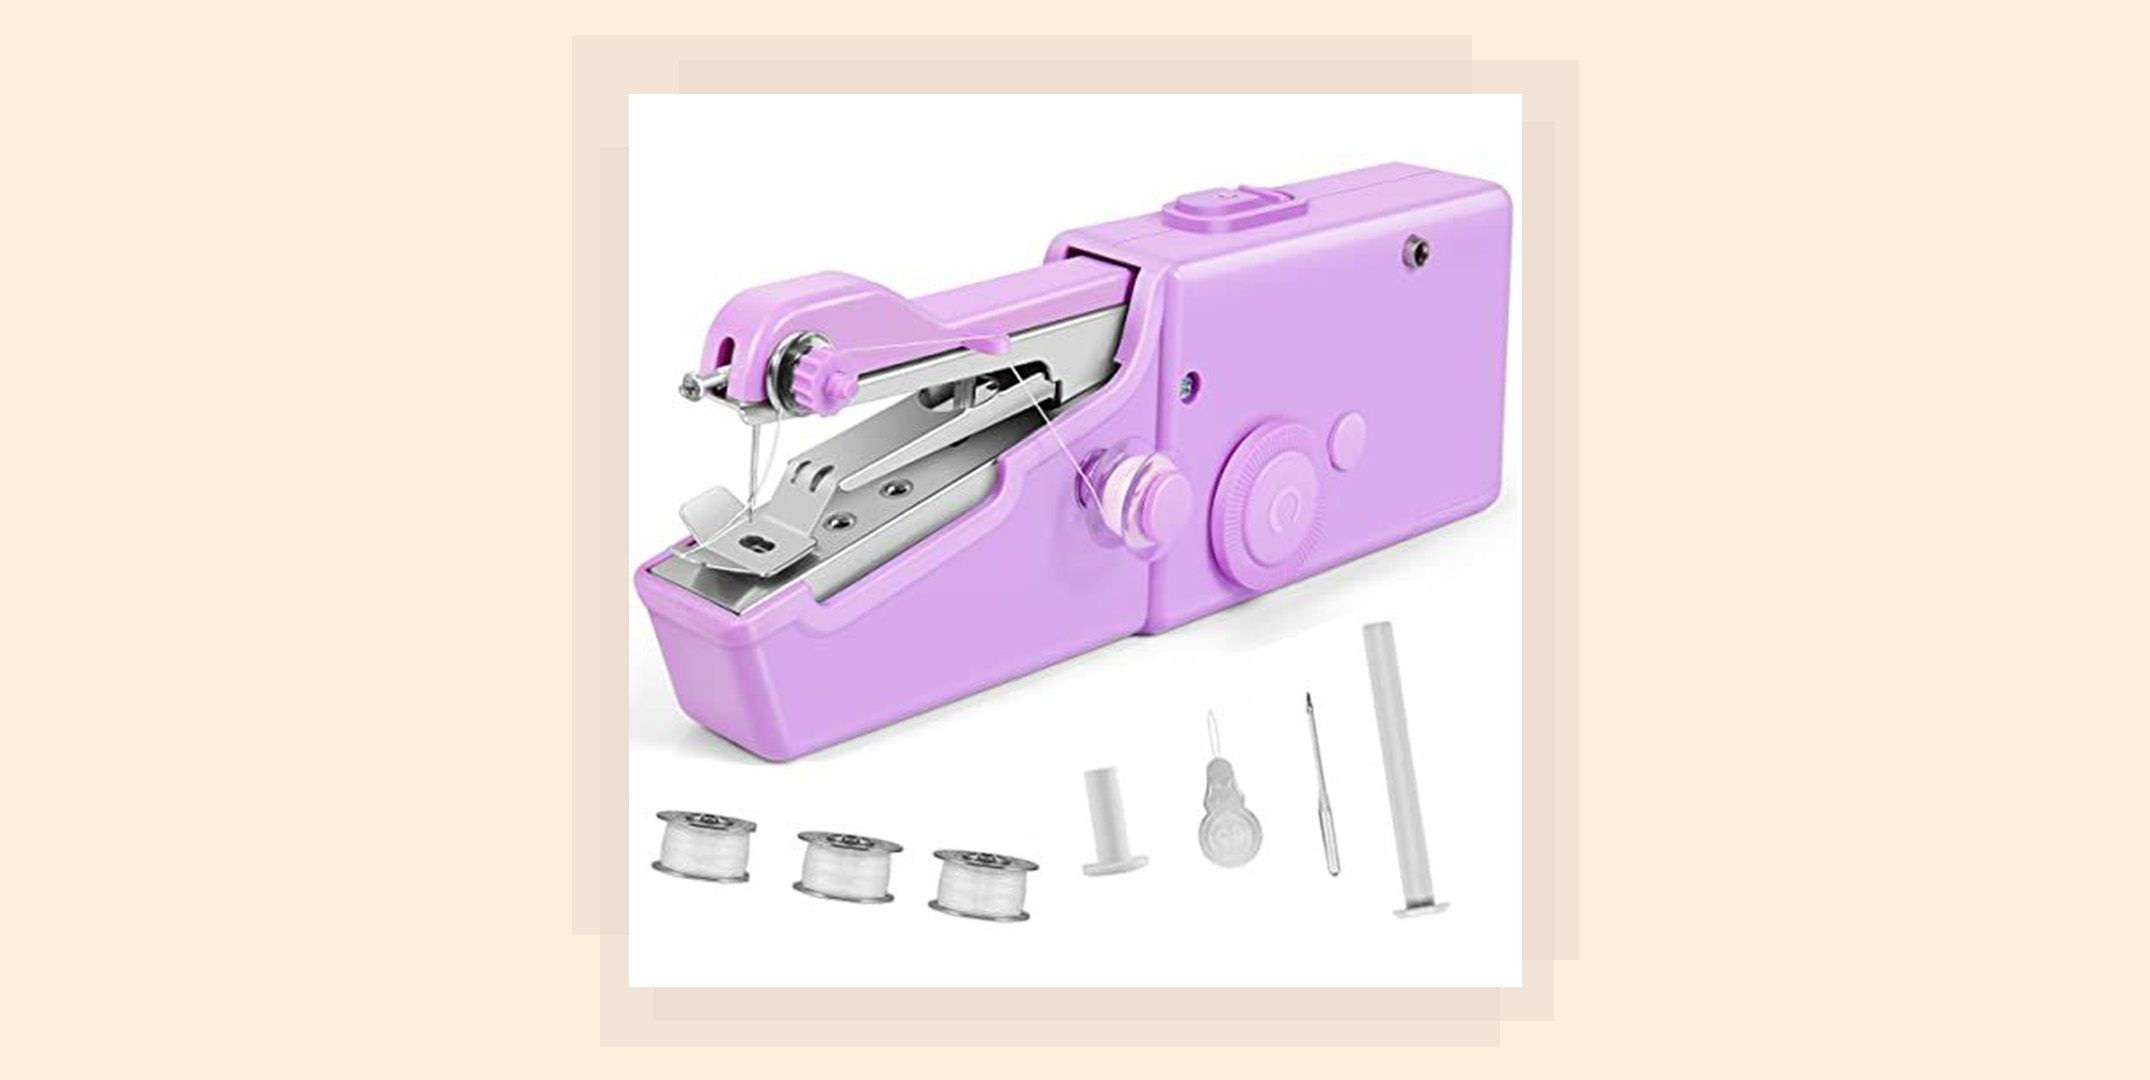 Portable Sewing Machine Sewing Kit Tailor Stitch Hand-held Home